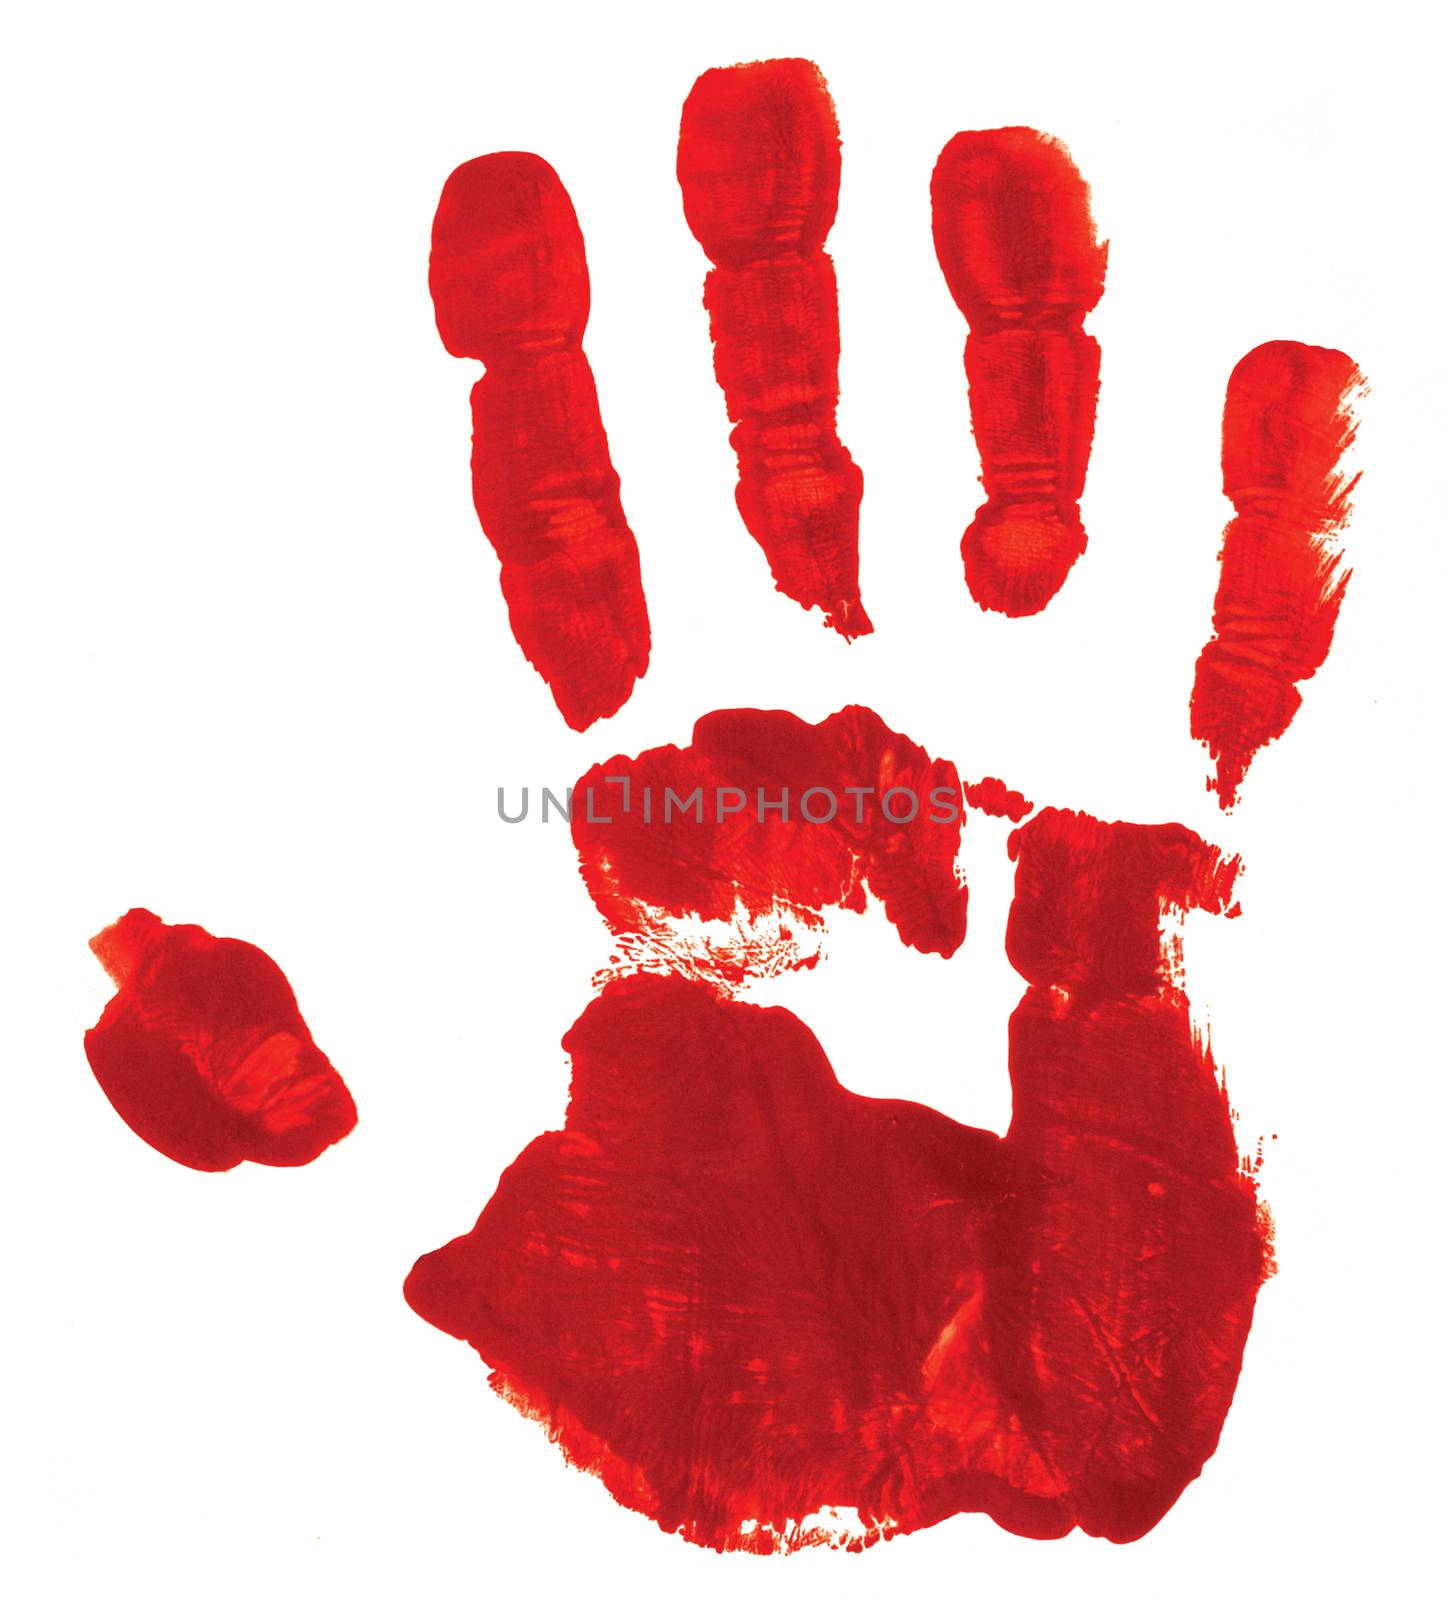 Red hand print on white background by Balefire9